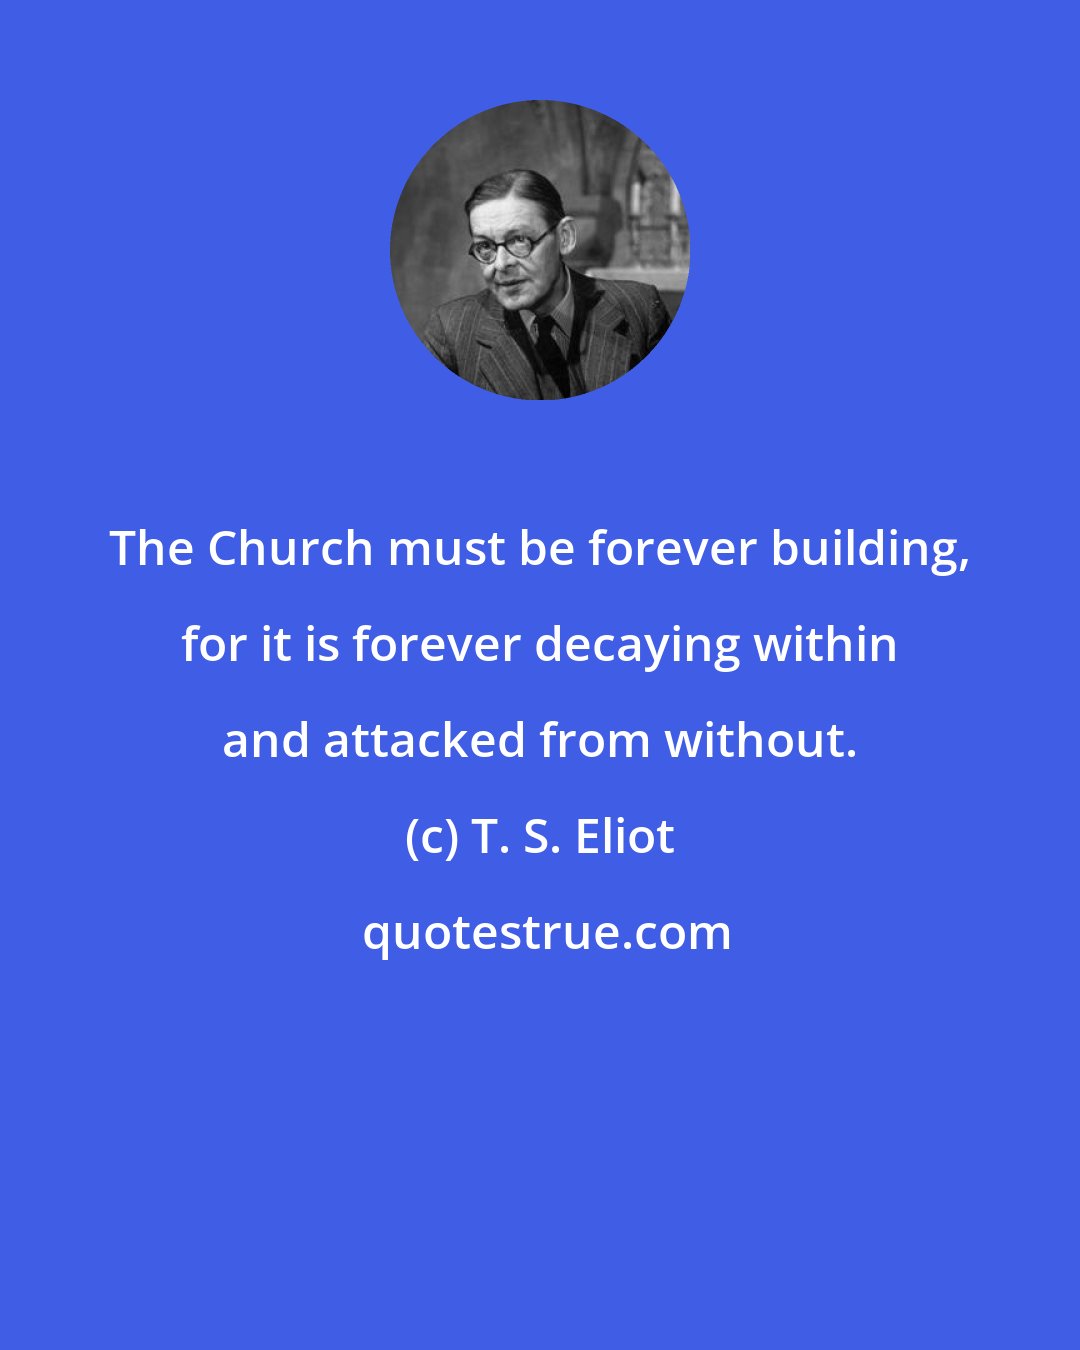 T. S. Eliot: The Church must be forever building, for it is forever decaying within and attacked from without.